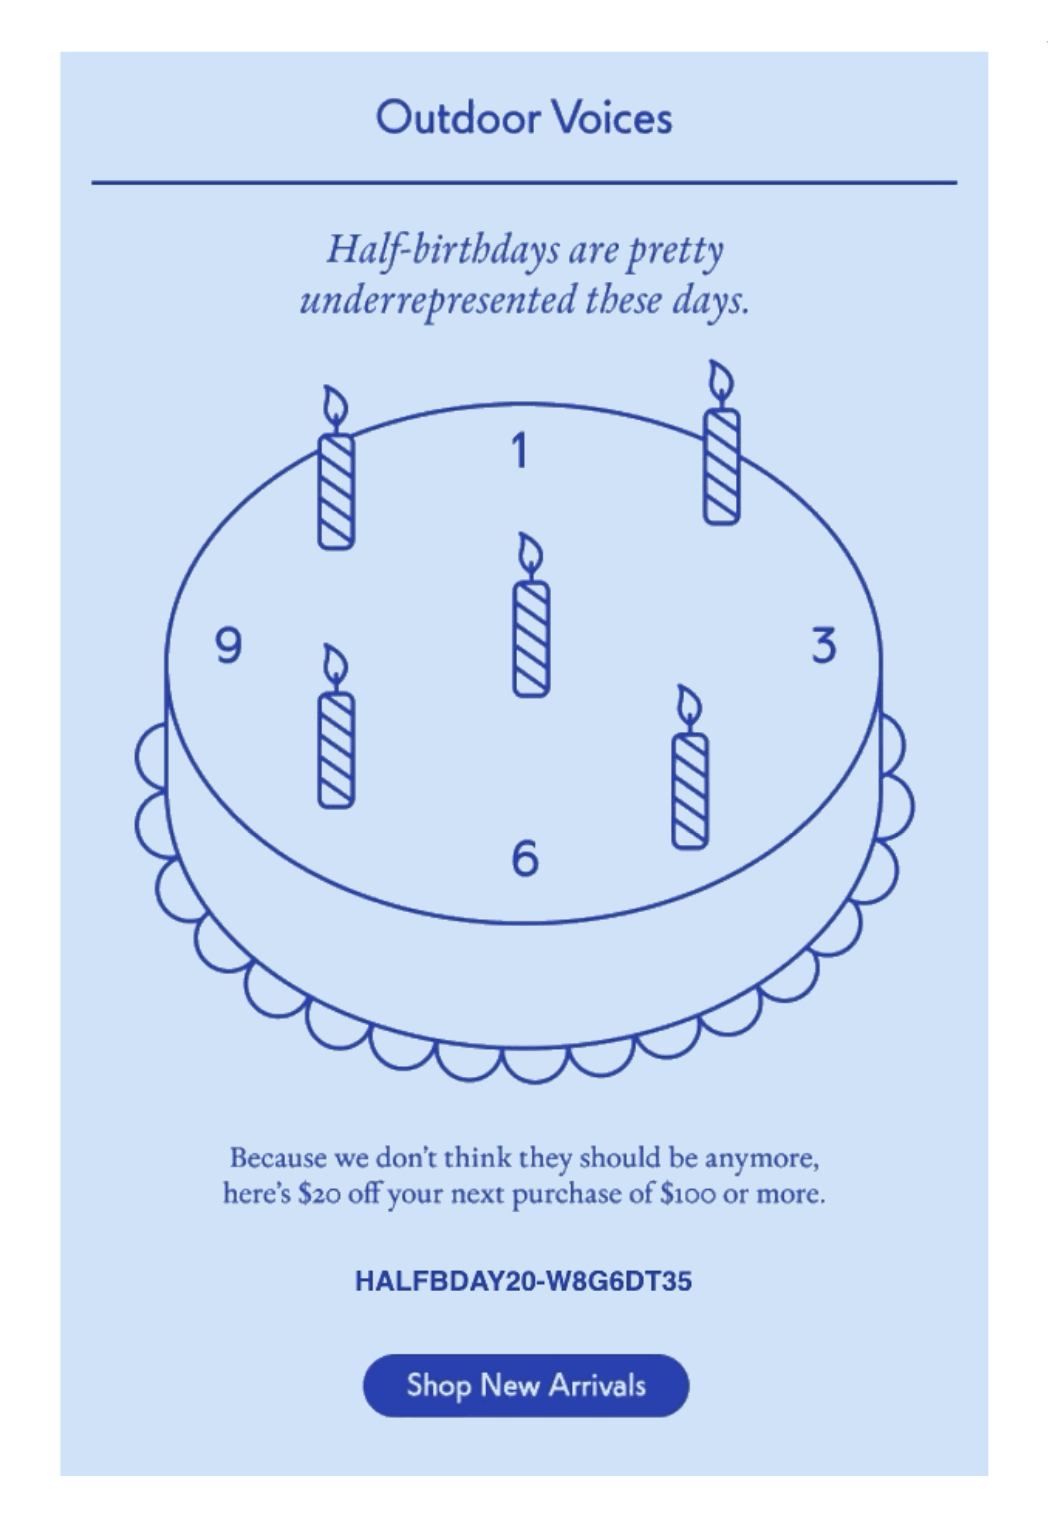 Outdoor Voices birthday email